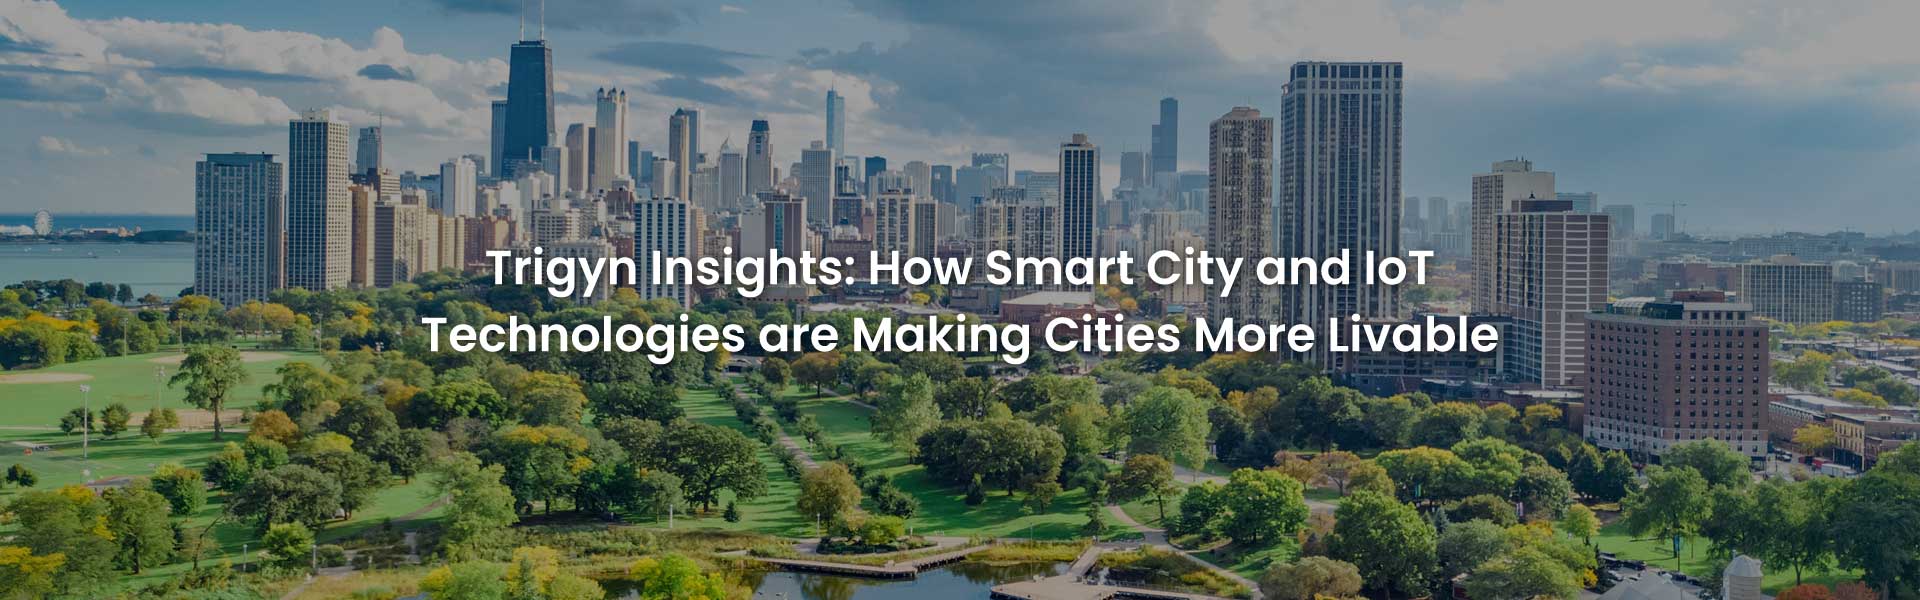 Smart City and IoT Technologies